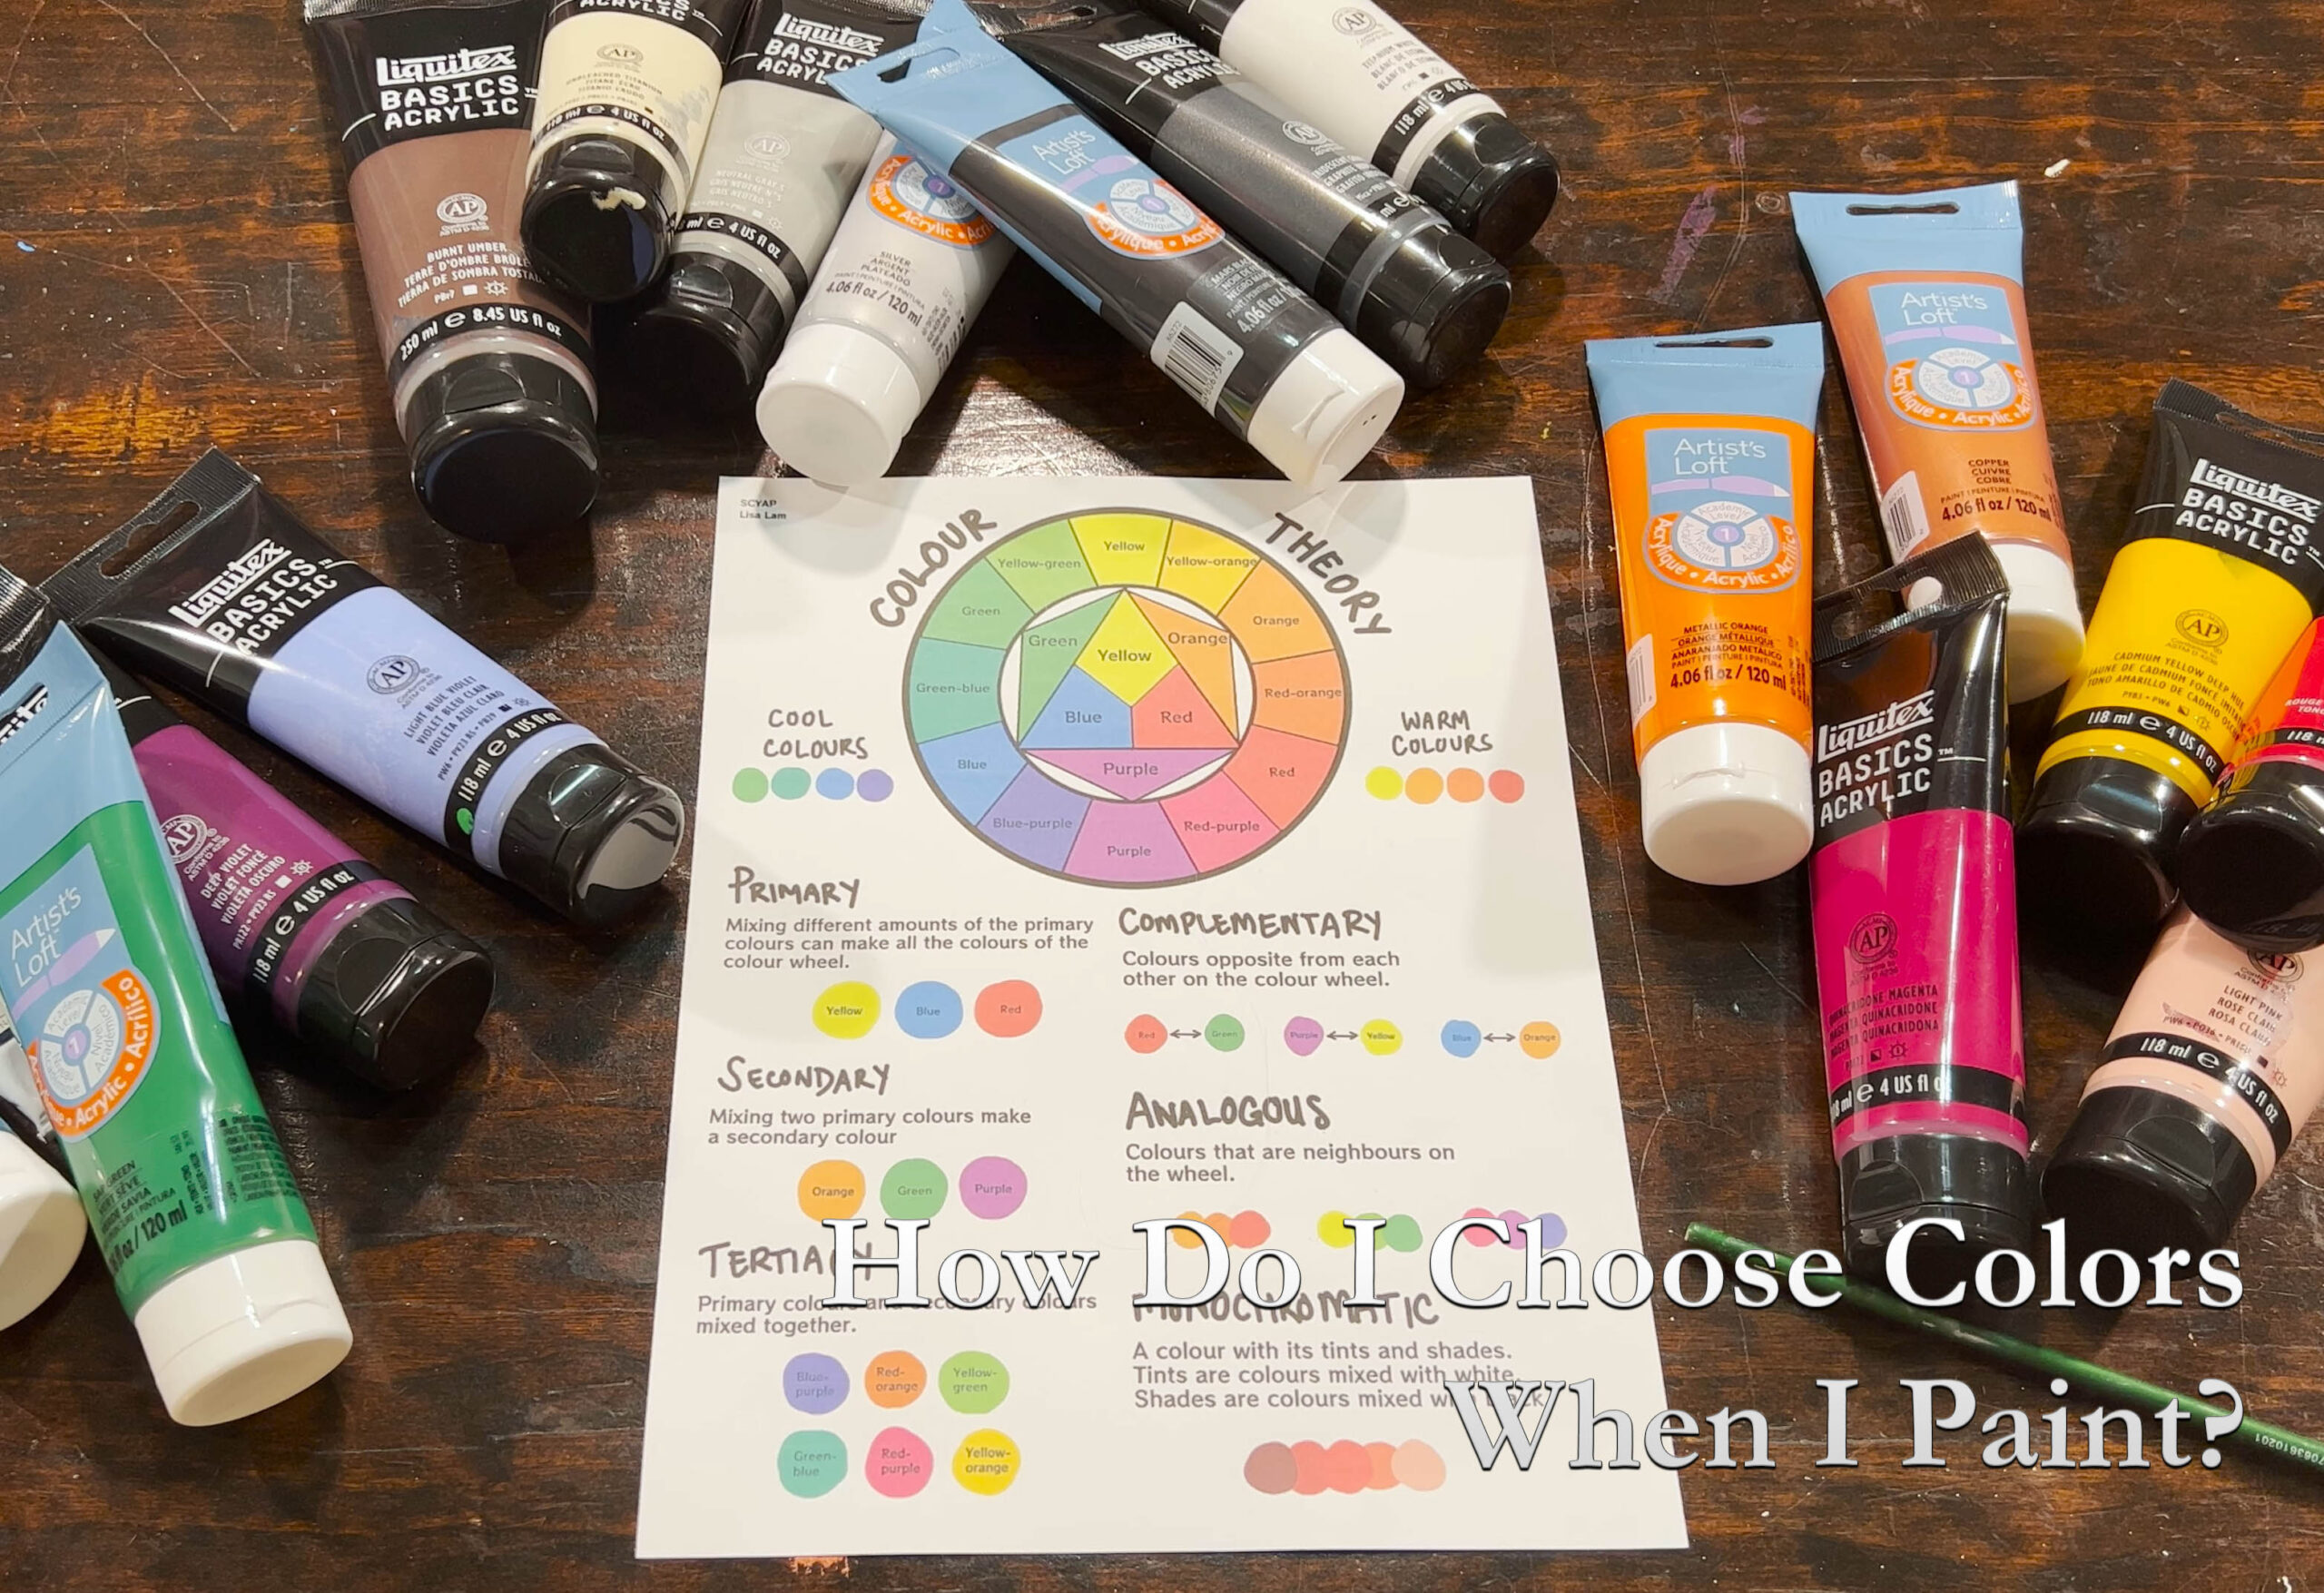 Artist Q&A of the Week: How Do I Choose Paint Colors When I Start a New Painting?